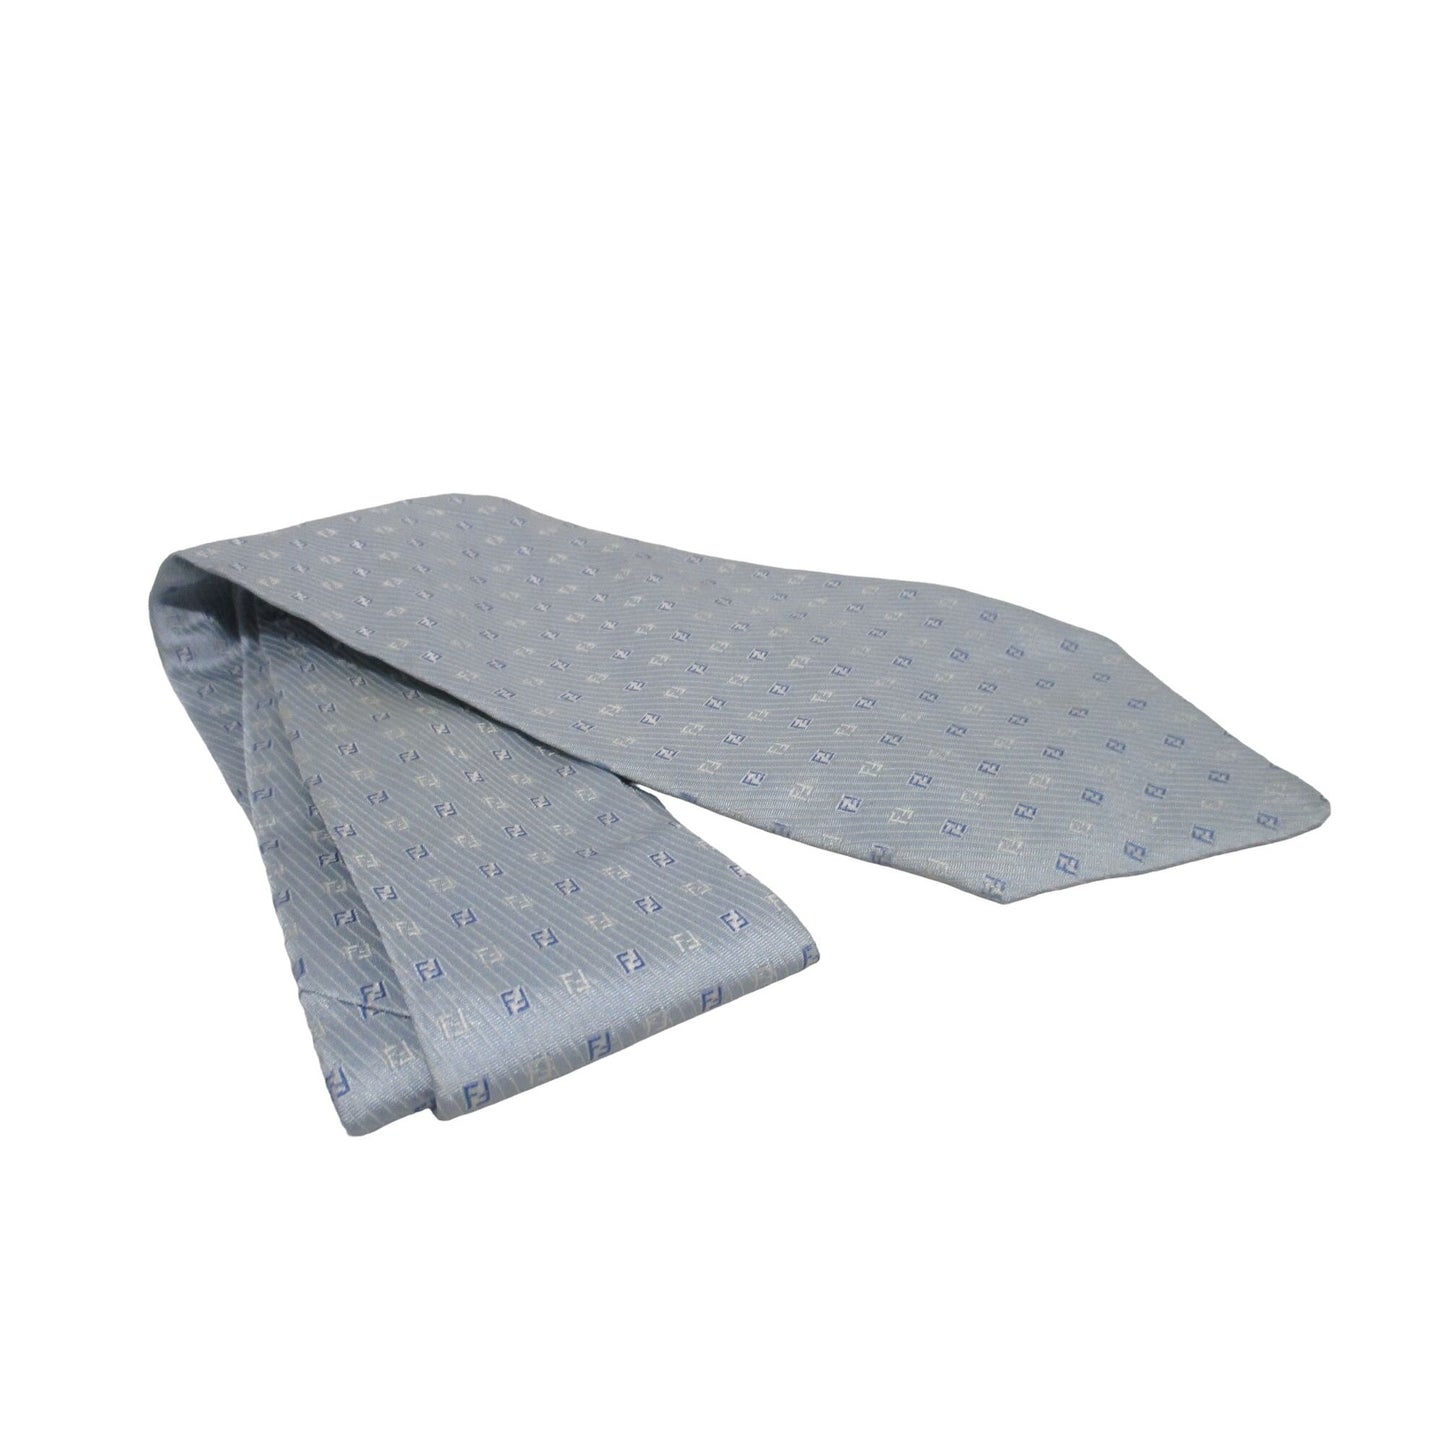 Vintage Fendi tie/scarf made of 100% light blue silk with a logo print in shades of blue